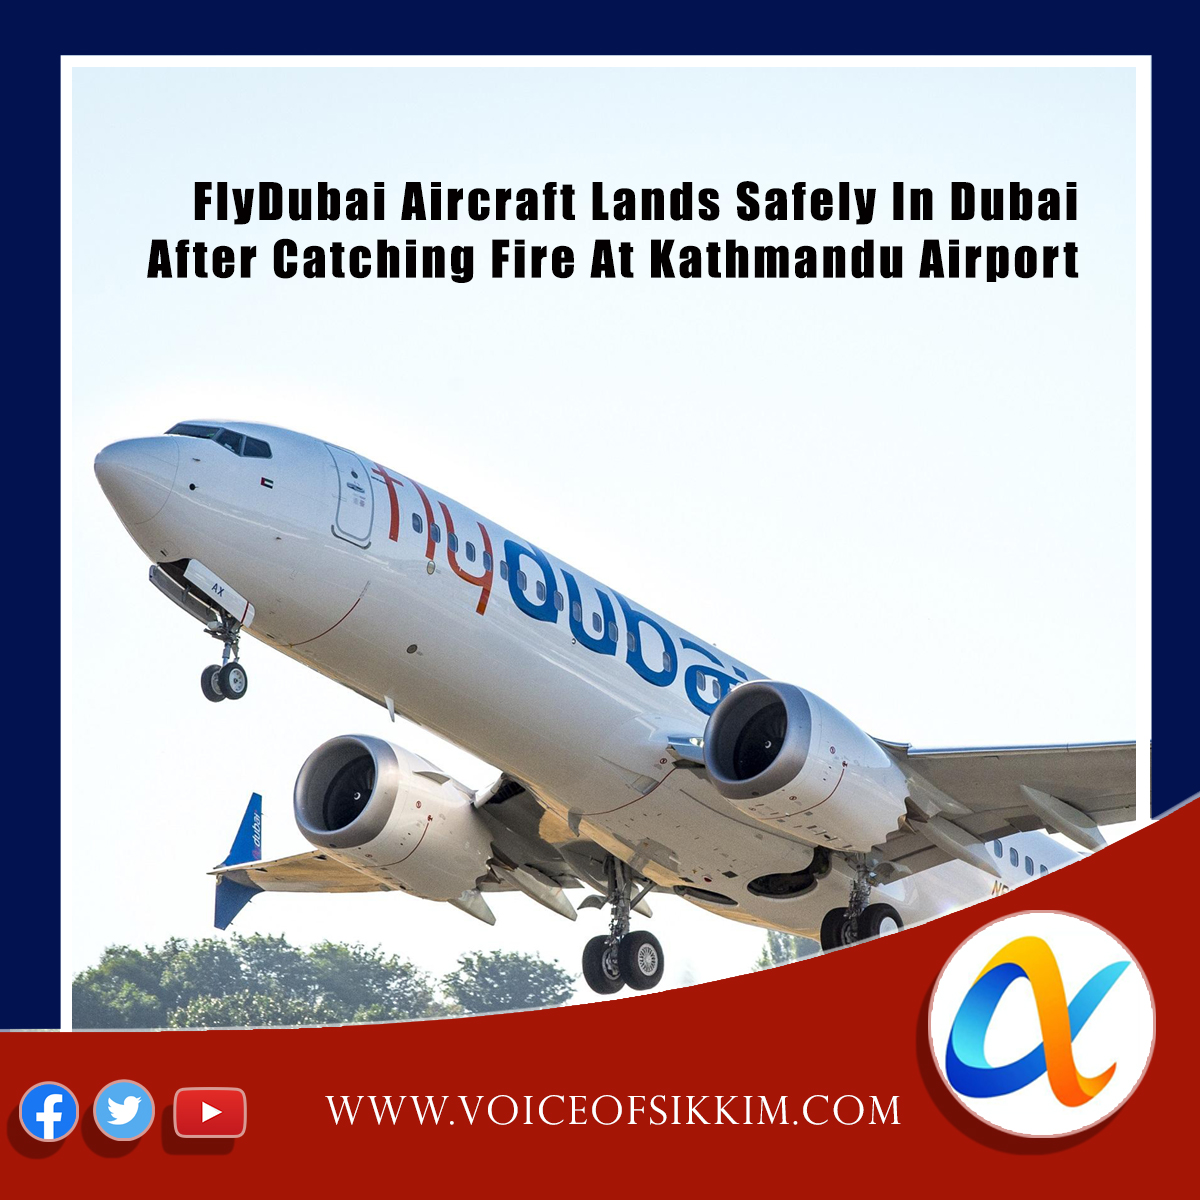 FlyDubai Aircraft Safely Landed After Technical Snag From Kathmandu Airport During Takeoff